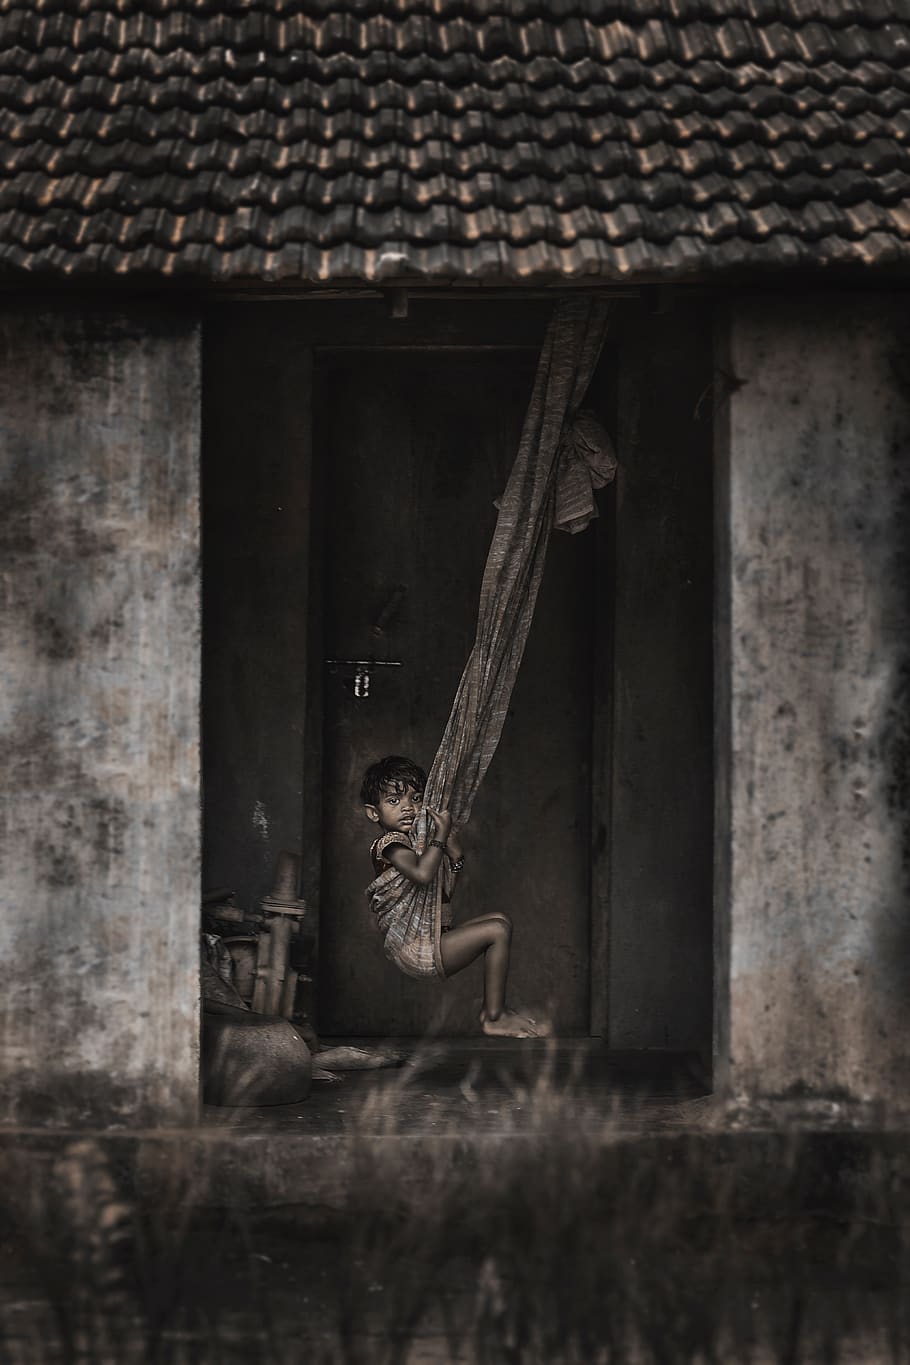 people, kid, child, poverty, poor, hammock, house, home, architecture